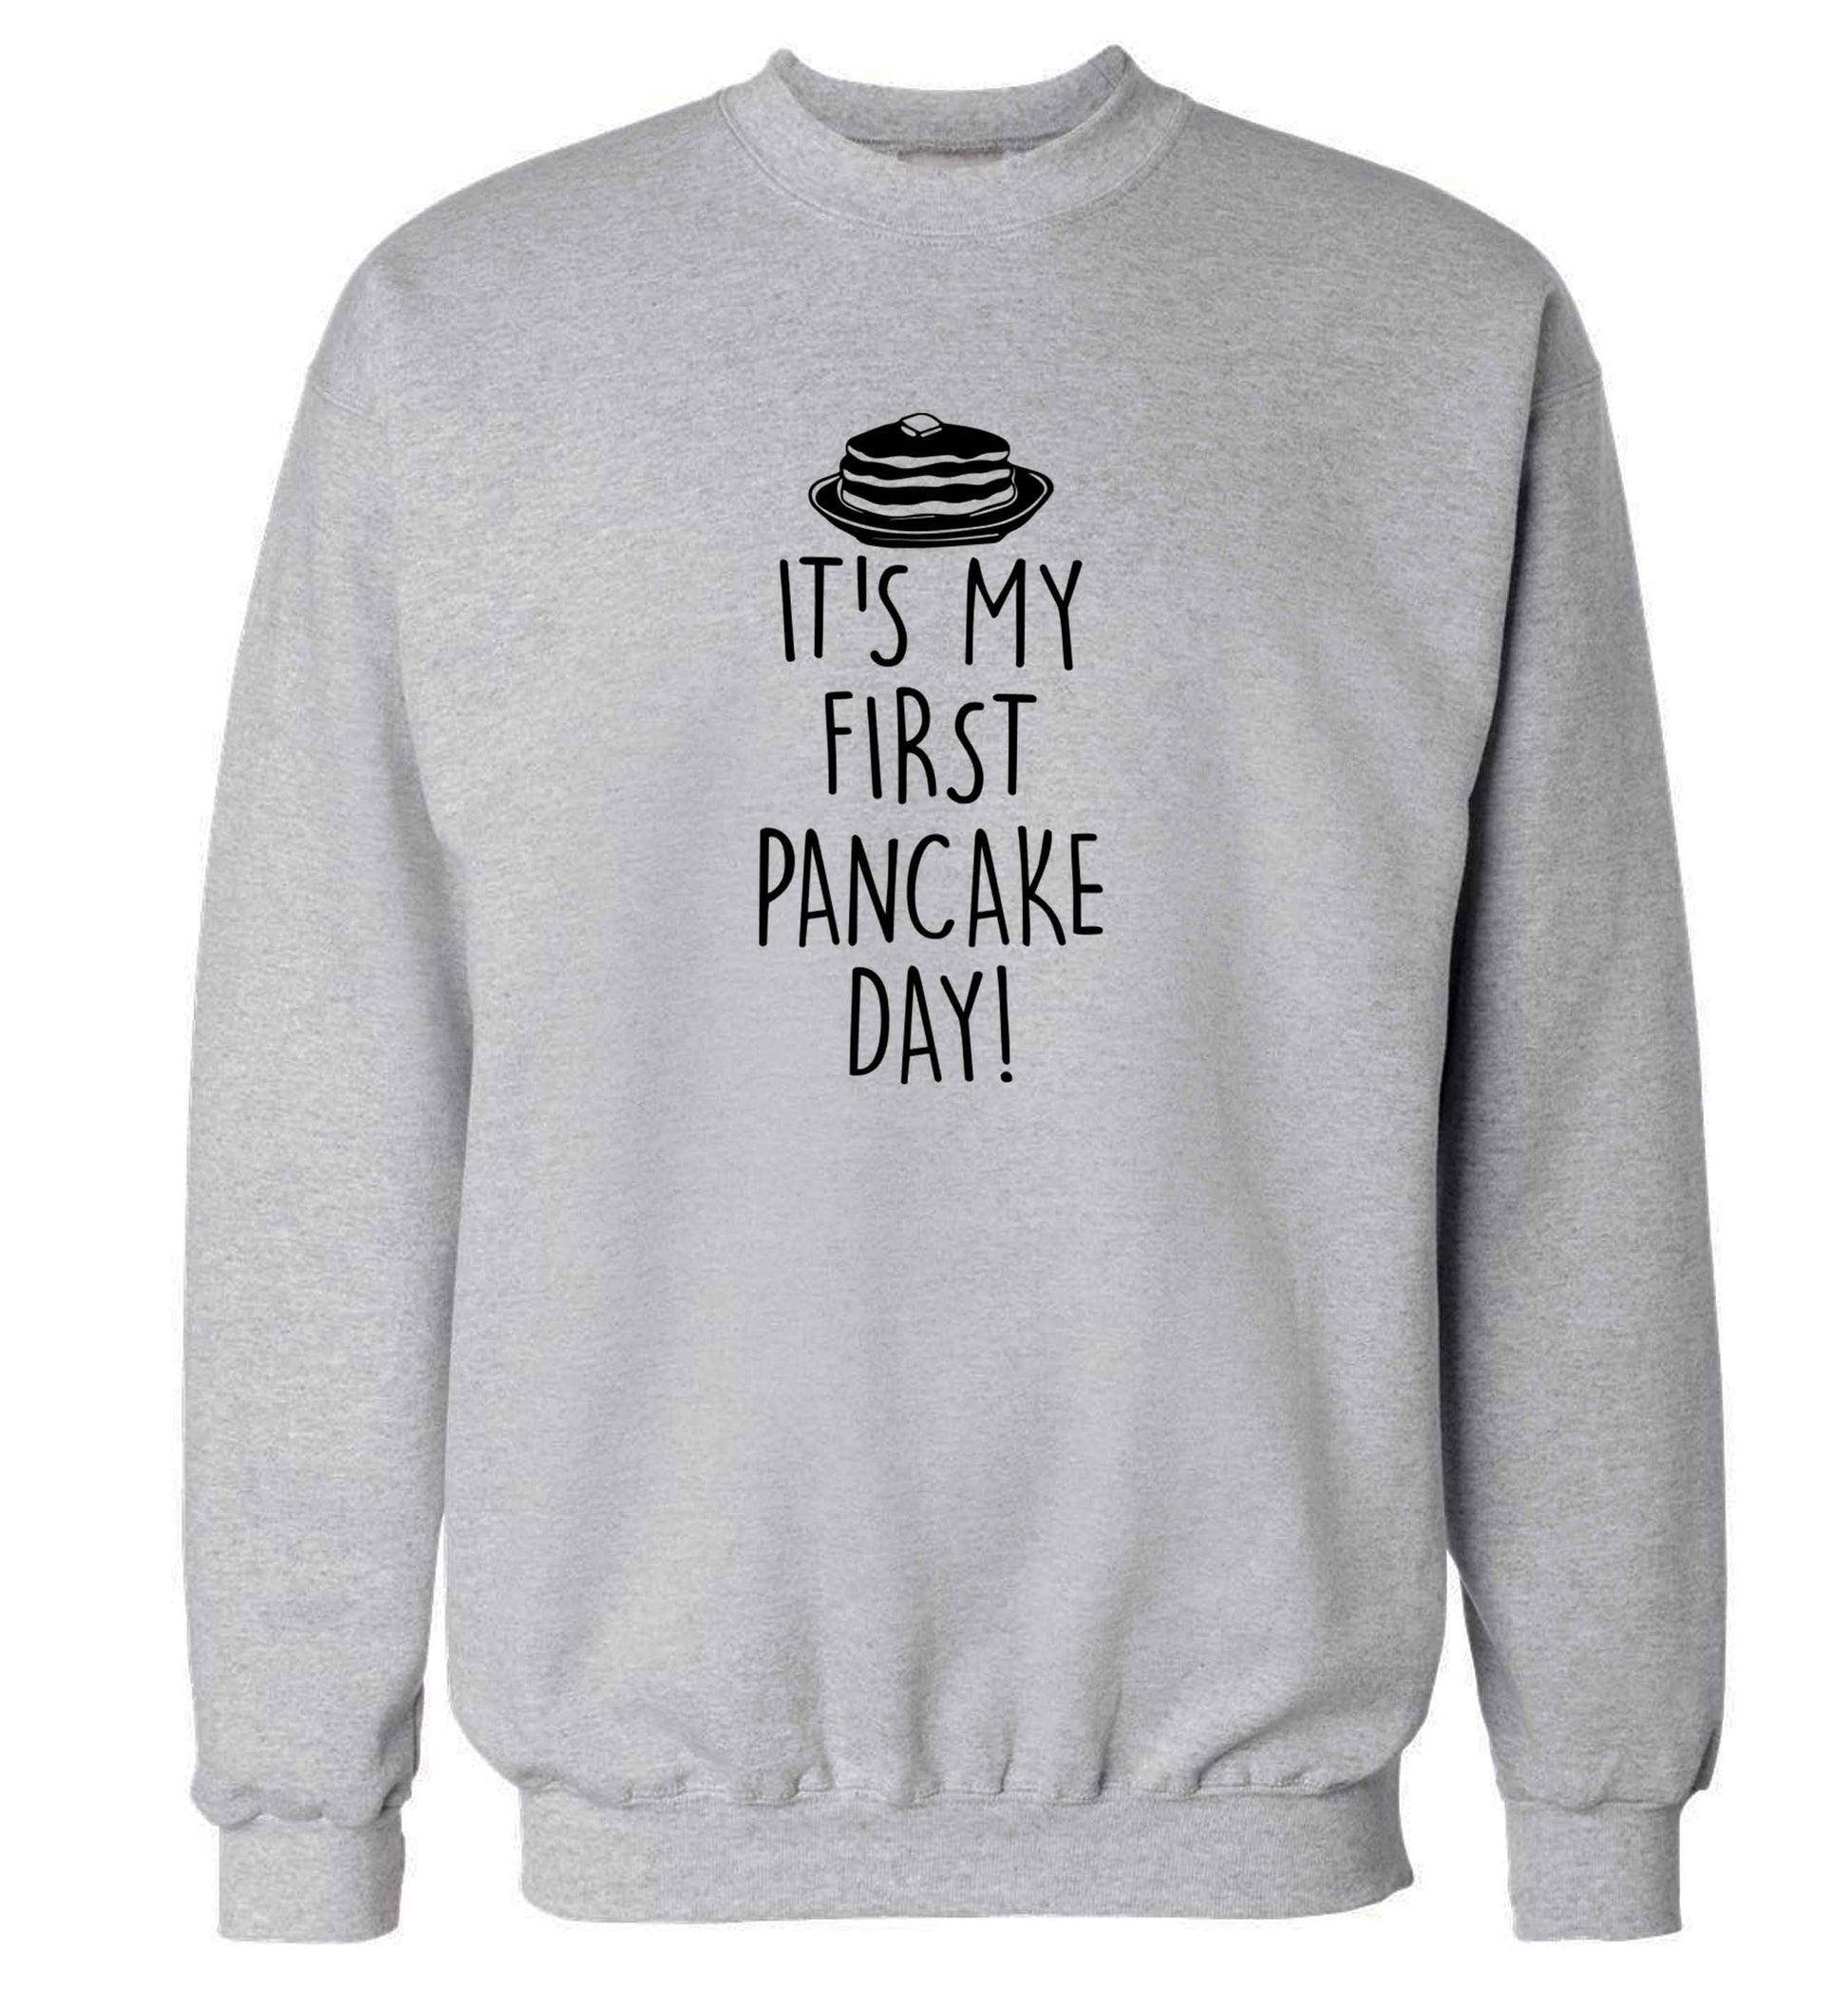 It's my first pancake day adult's unisex grey sweater 2XL